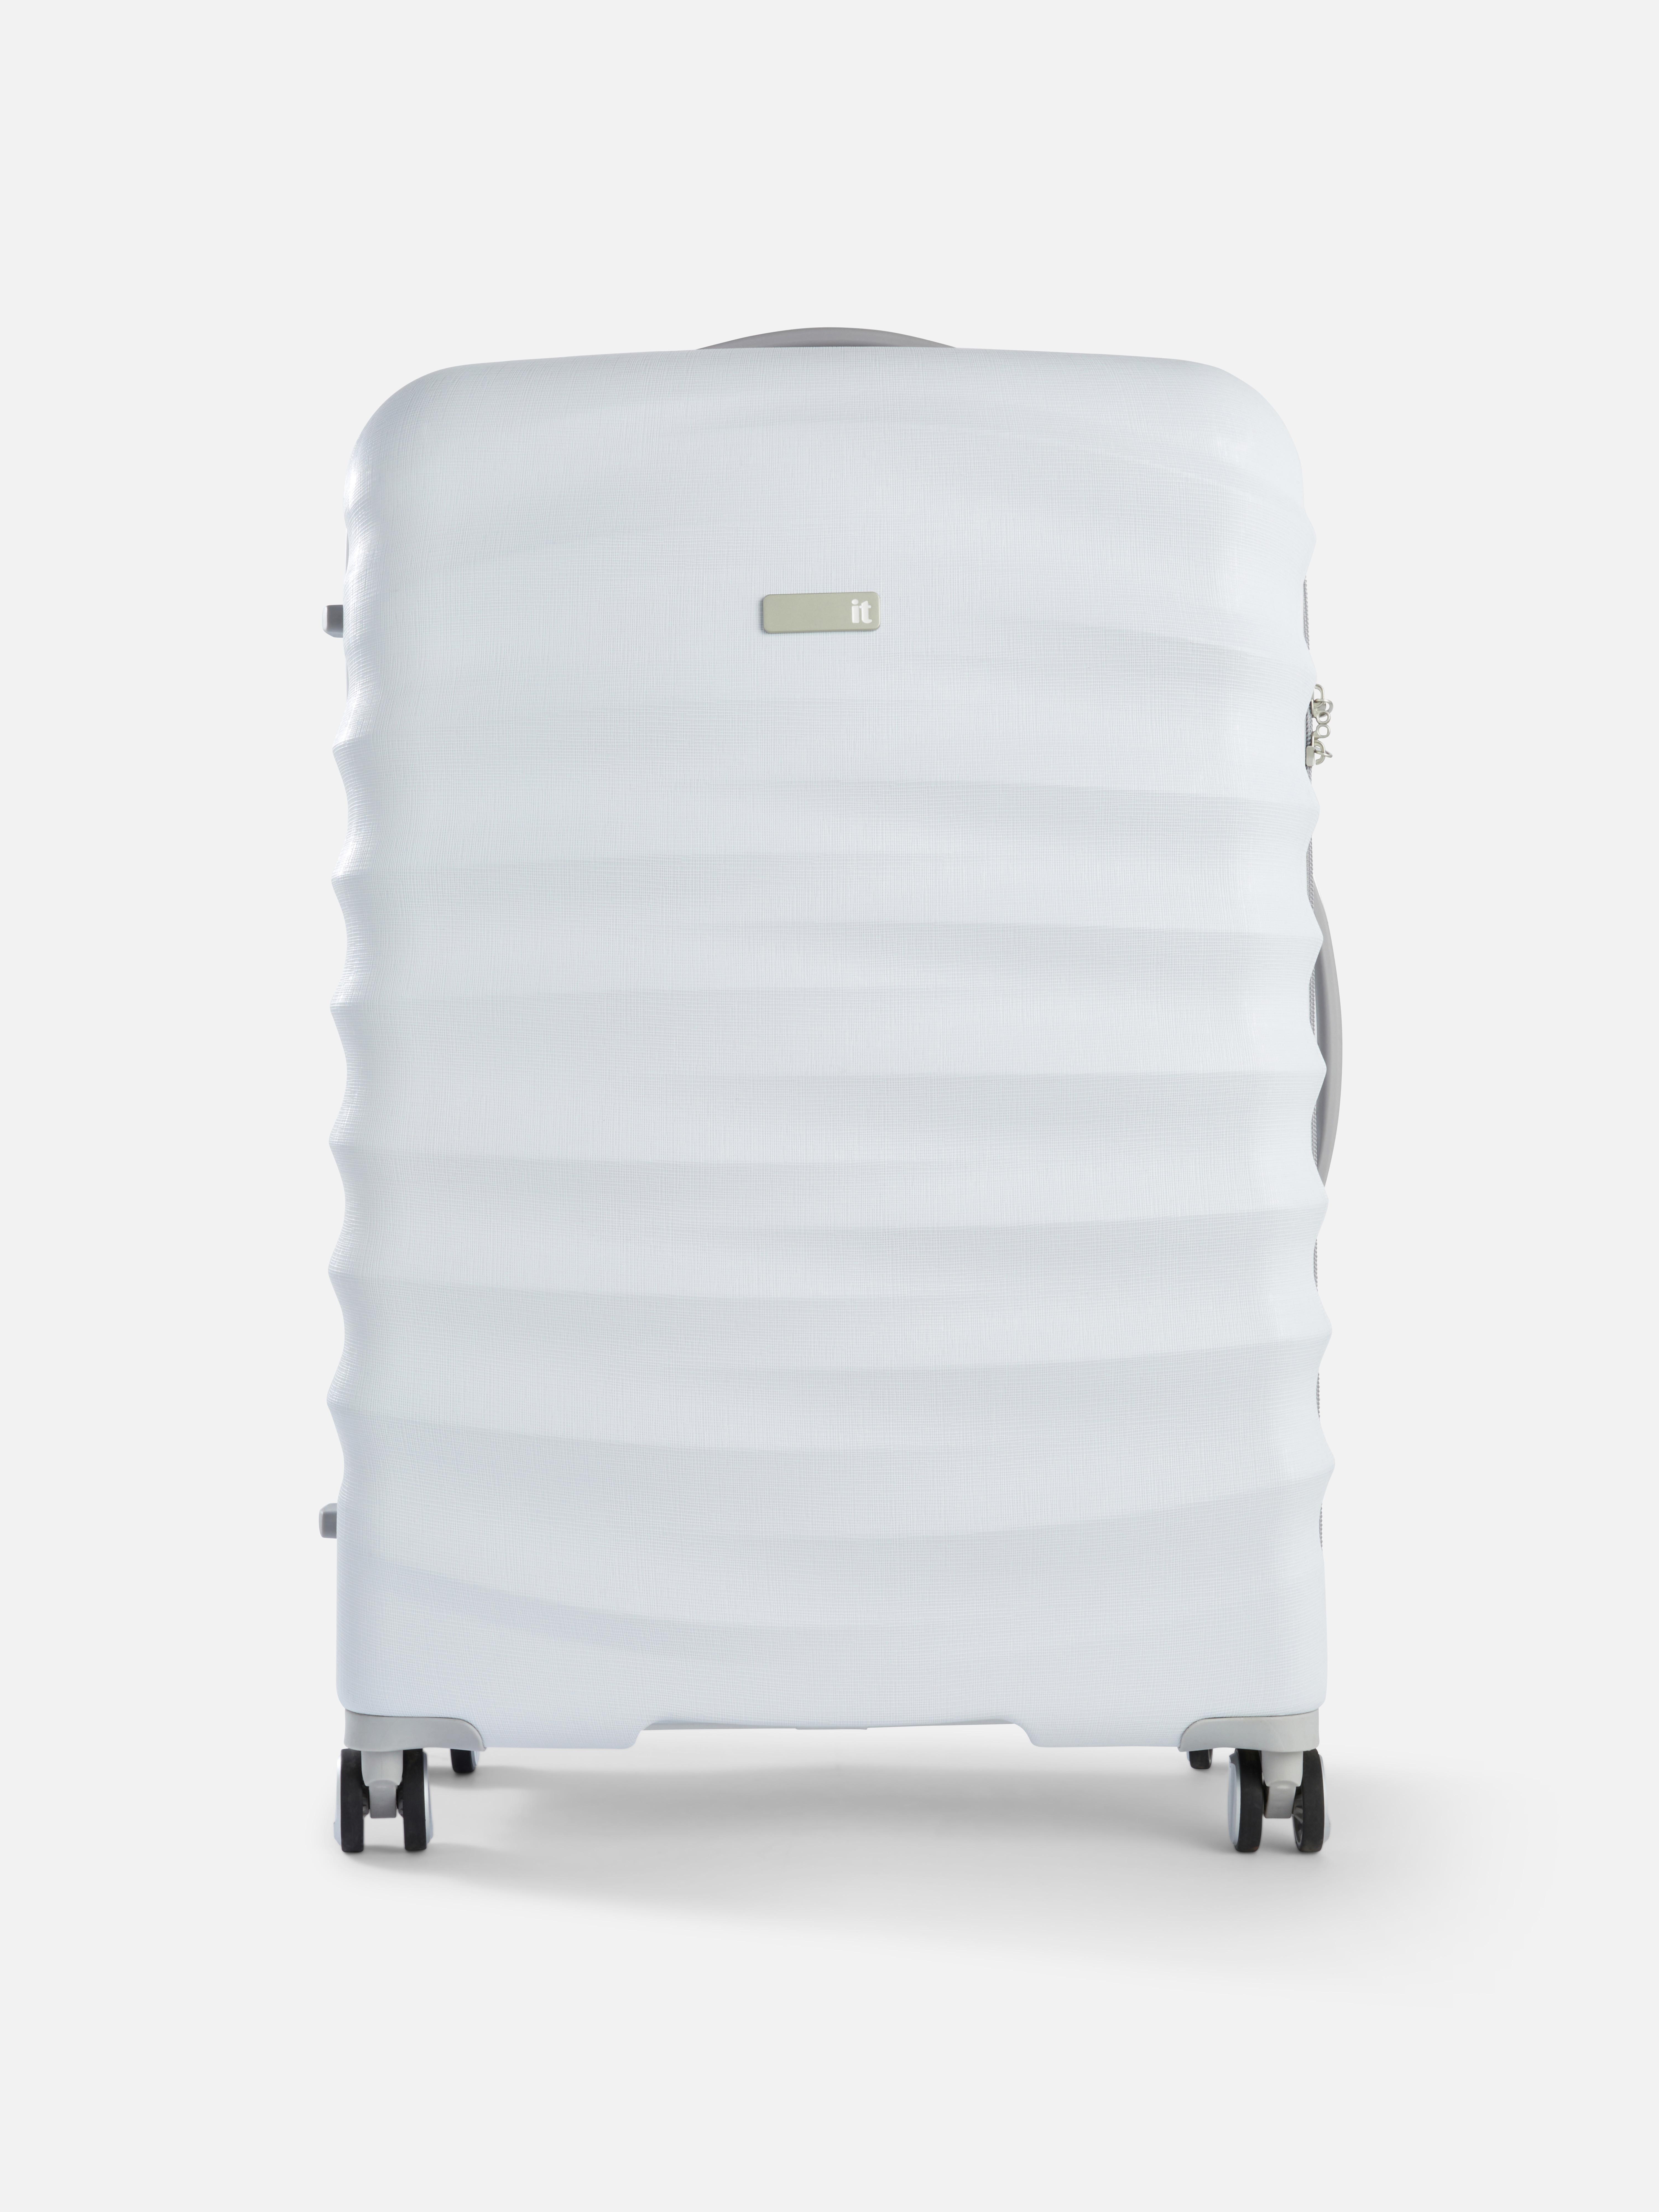 Textured Hard Shell Travel Suitcase